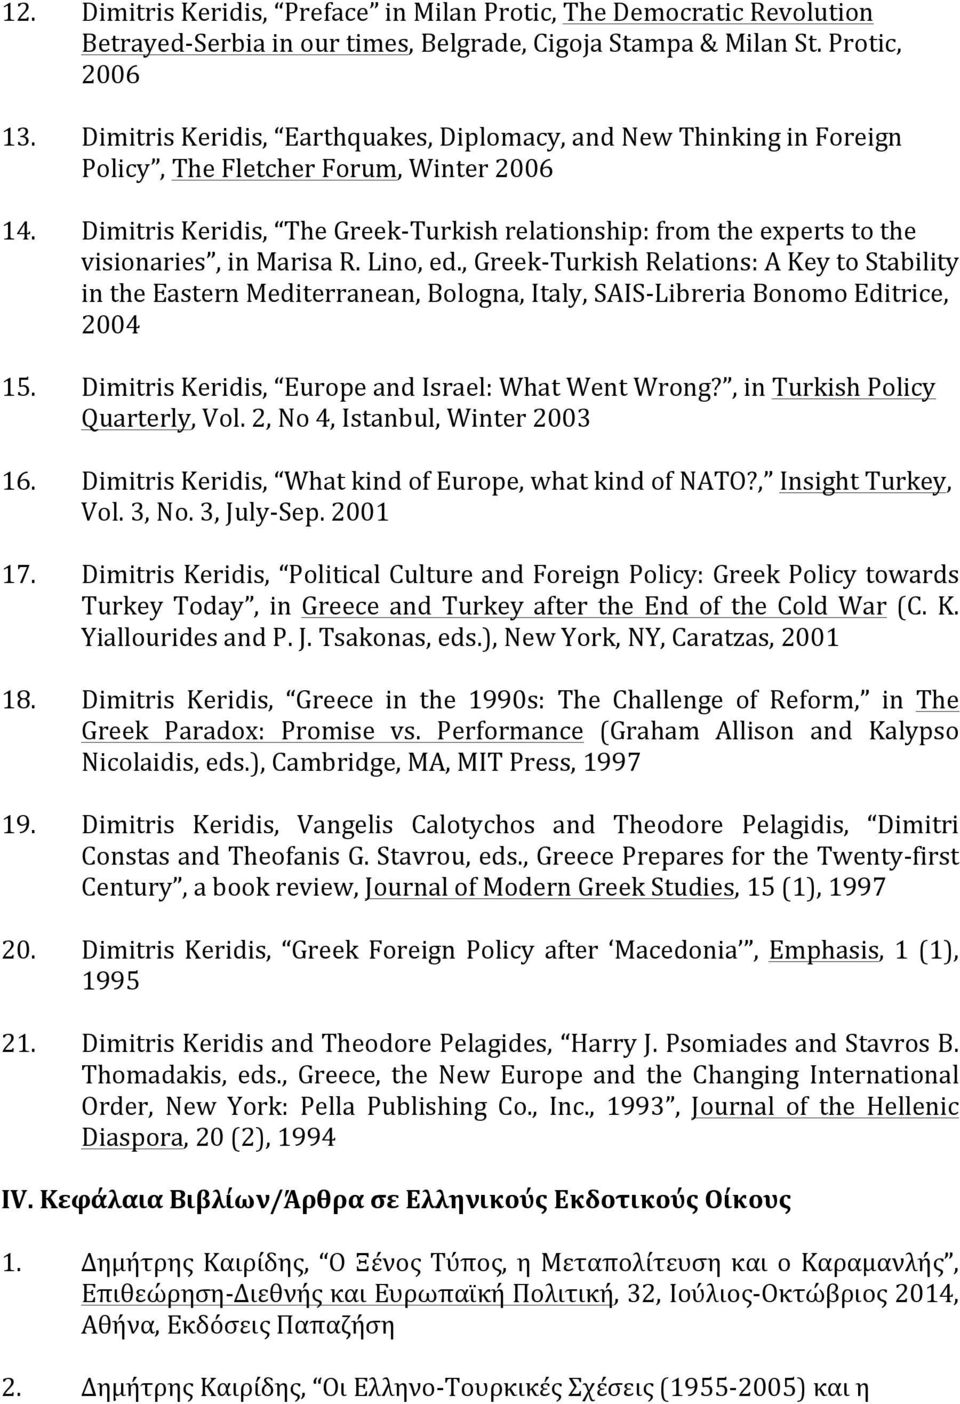 Dimitris Keridis, The Greek- Turkish relationship: from the experts to the visionaries, in Marisa R. Lino, ed.